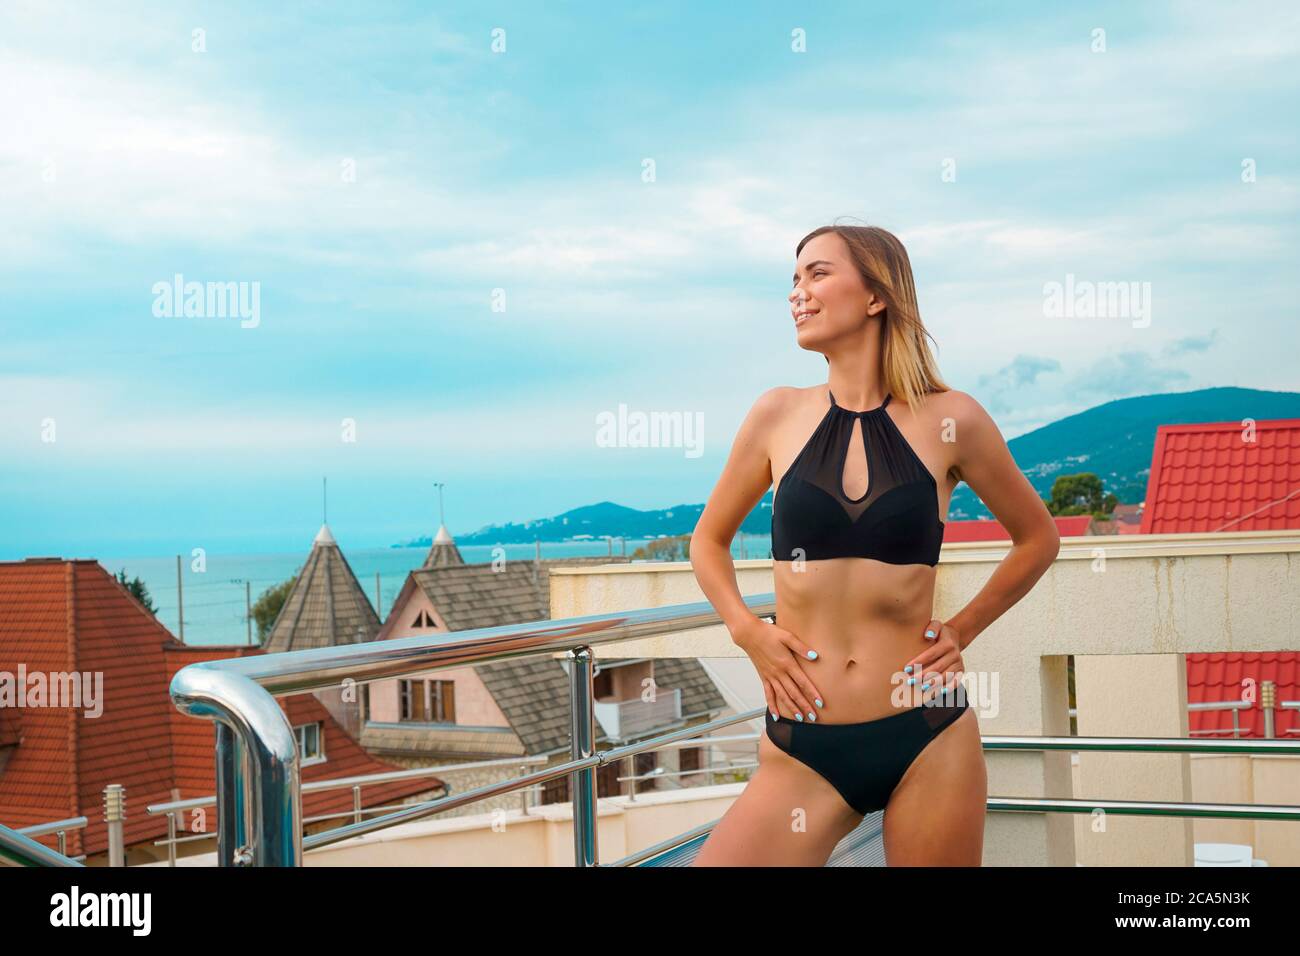 Beautiful tanned woman portrait at resort with beautiful view Stock Photo